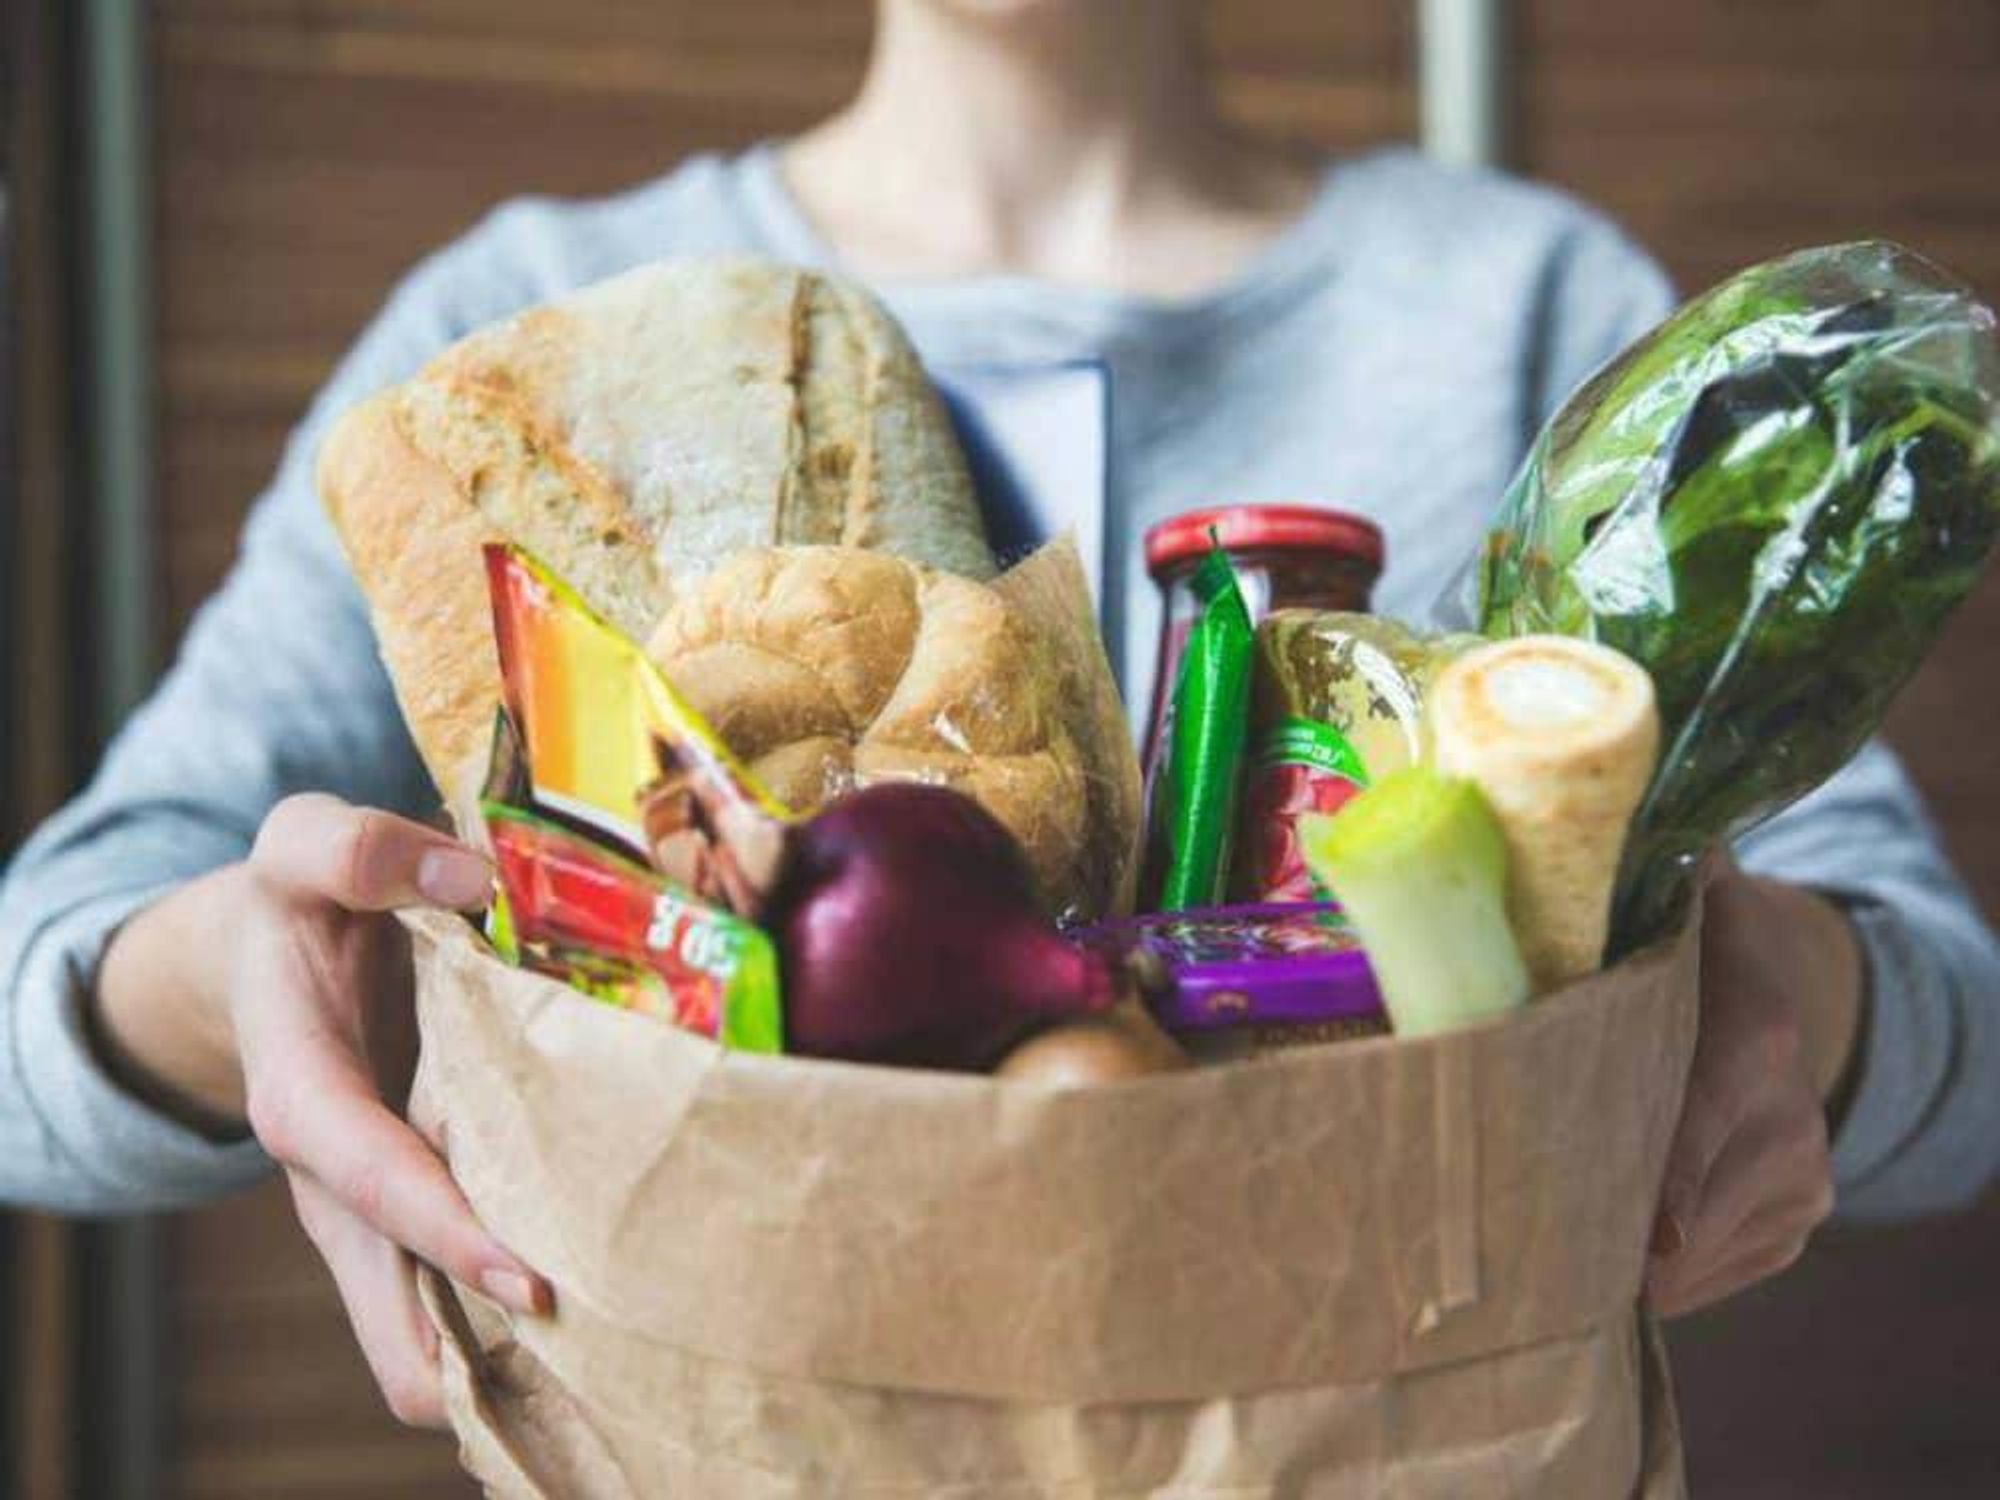 Instacart groceries in a bag for delivery